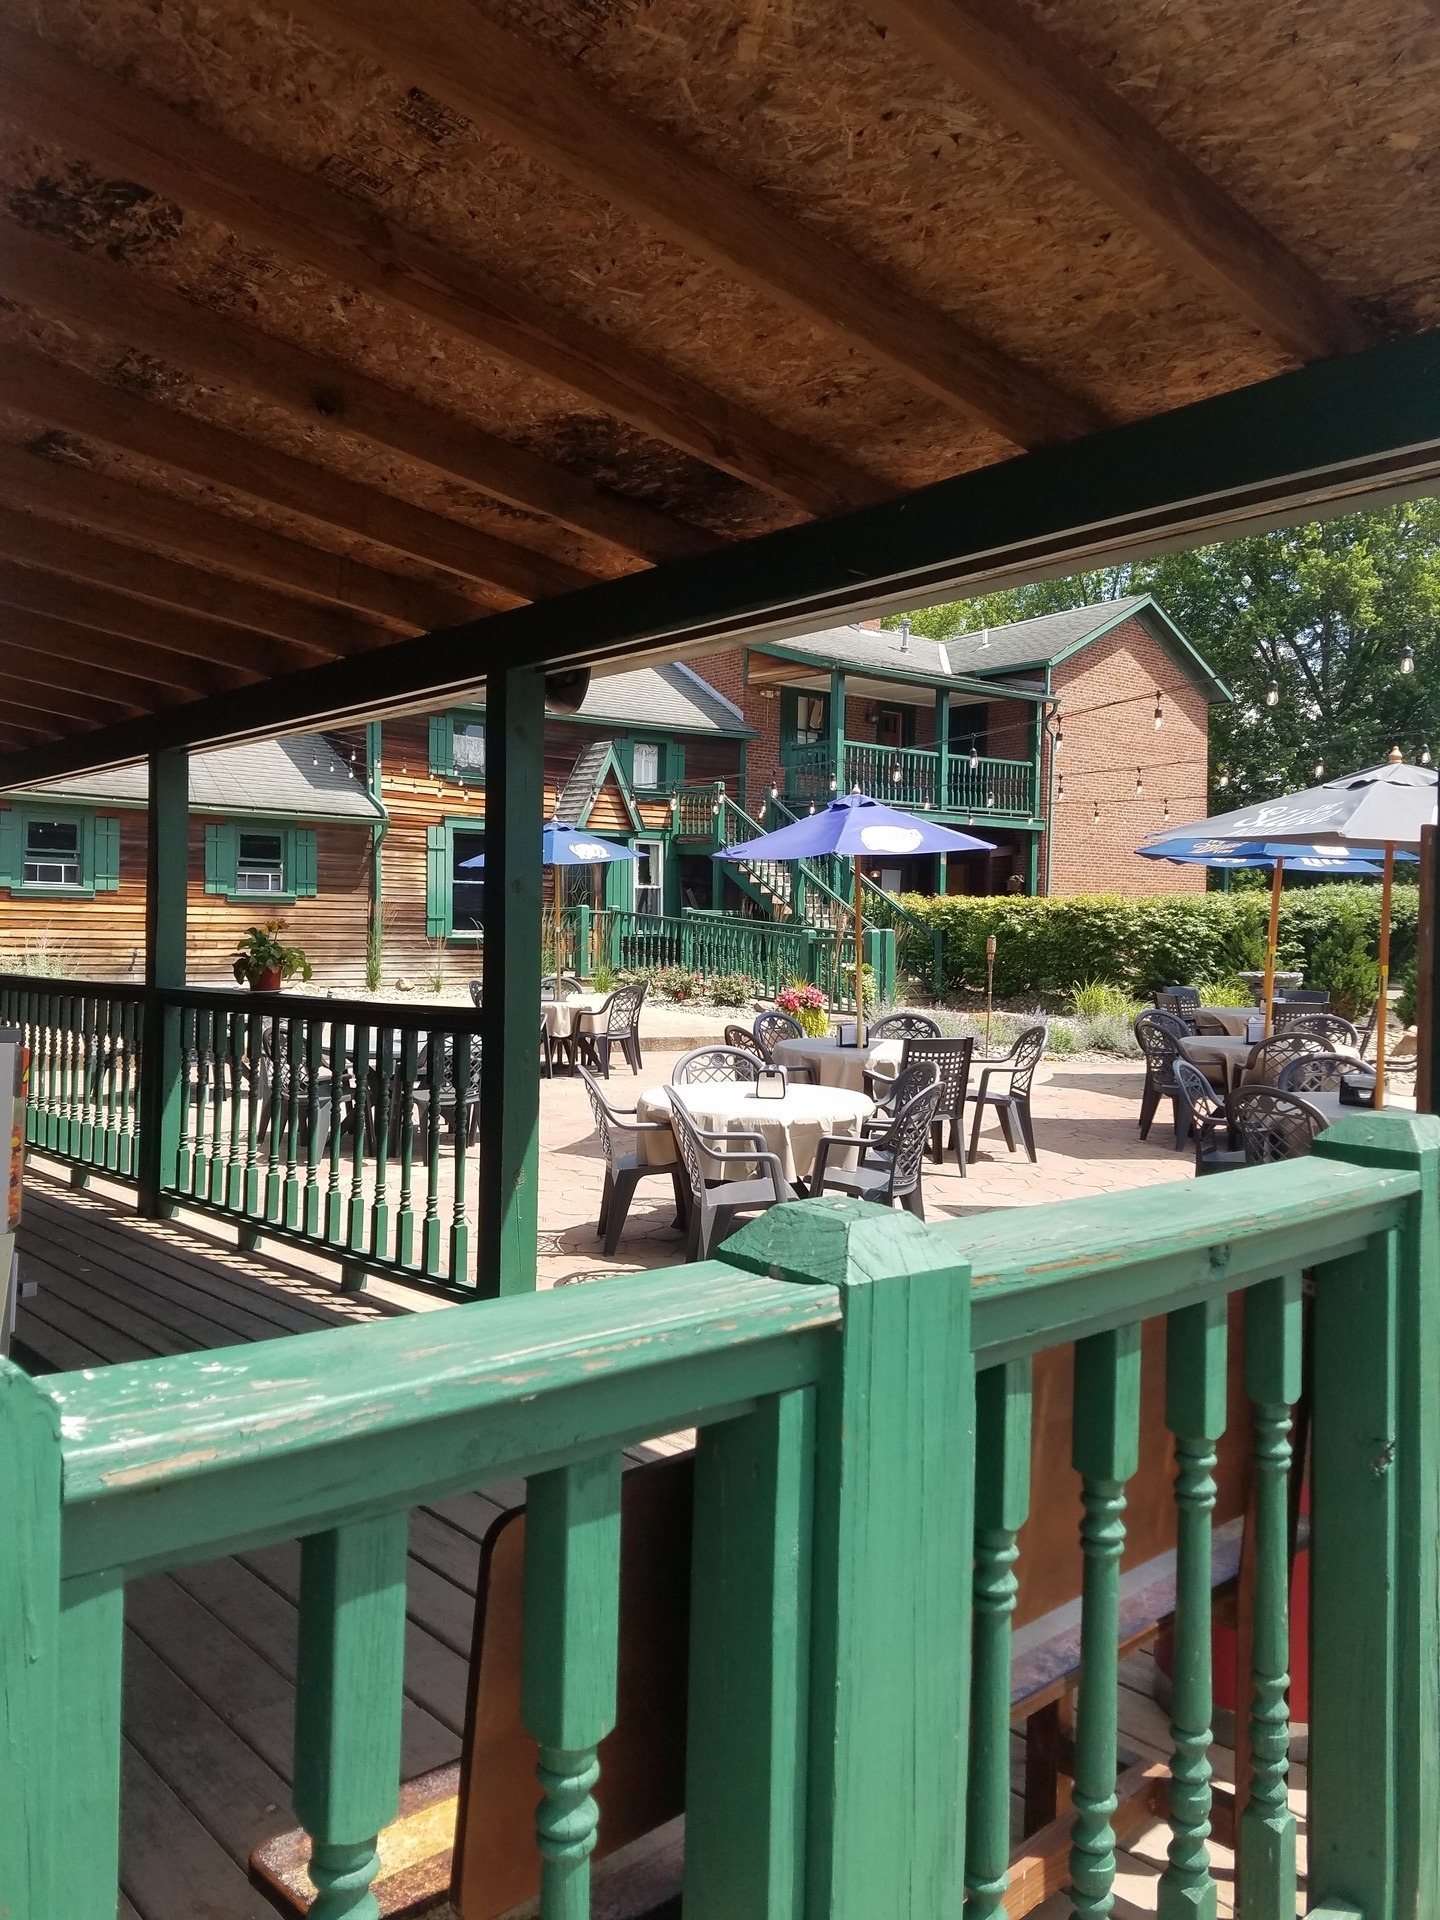 Outdoor dining available during the warmer months.